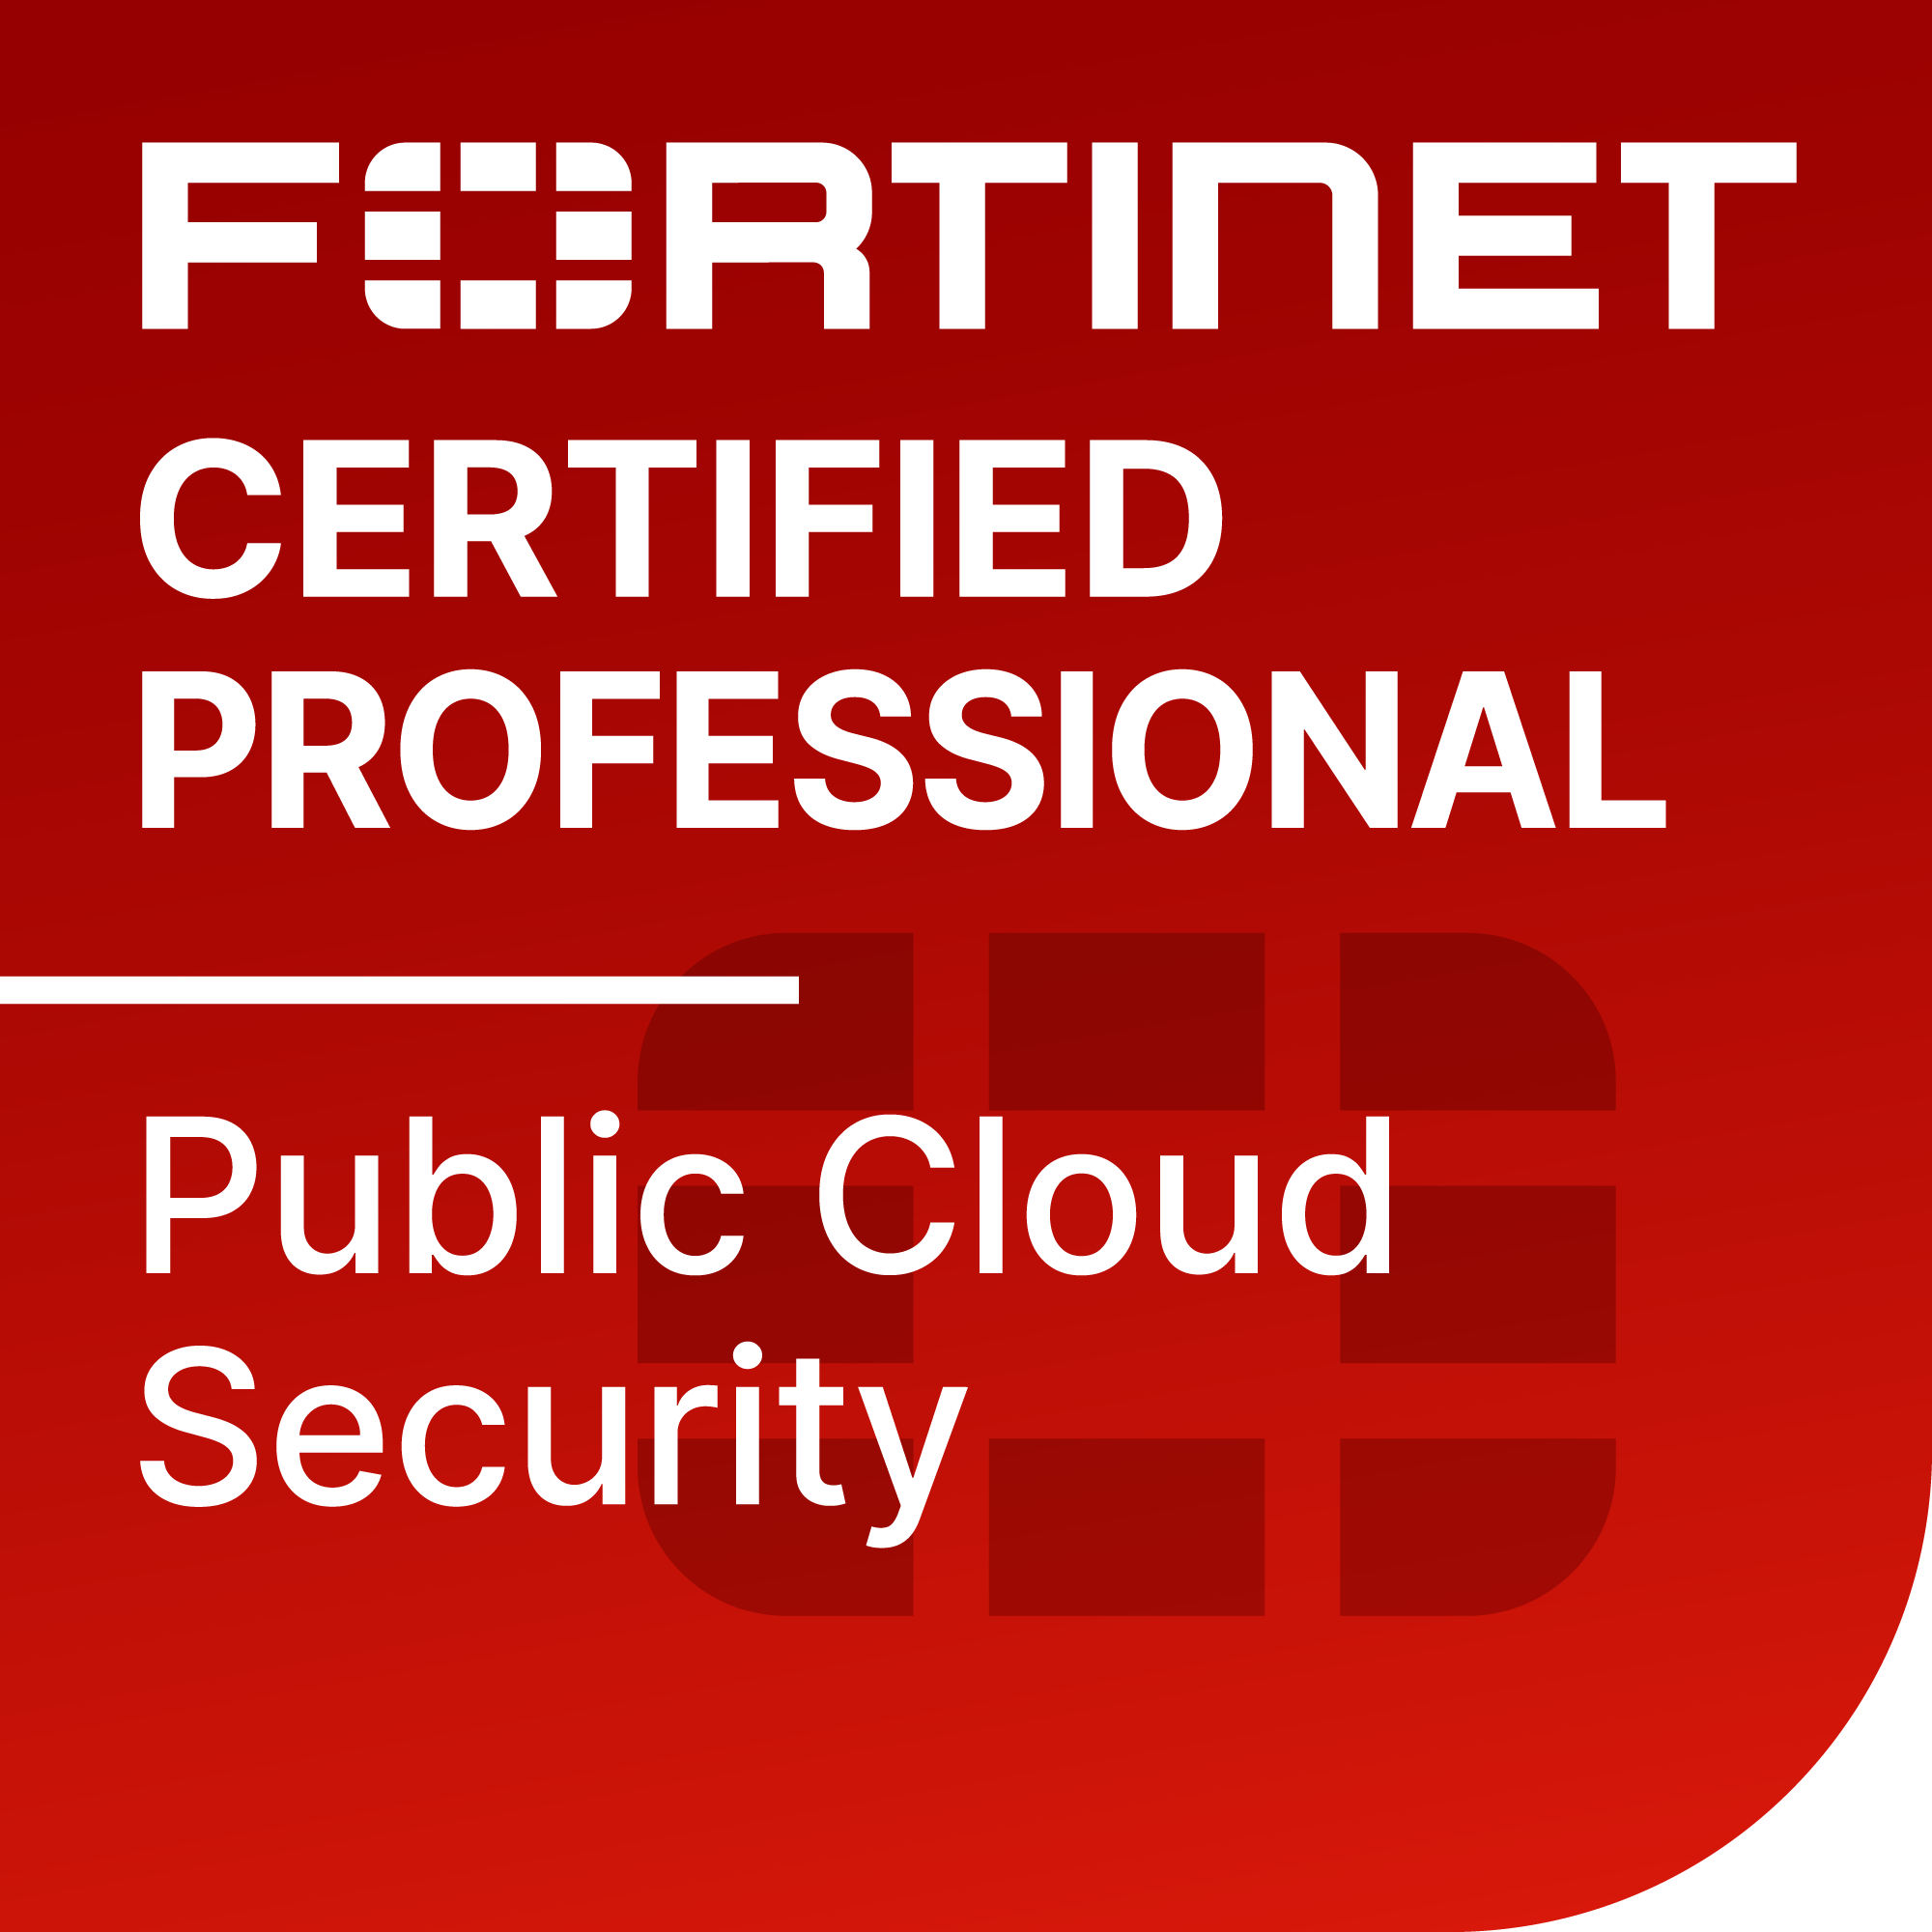 Fortinet Certified Professional (FCP) in Public Cloud Security